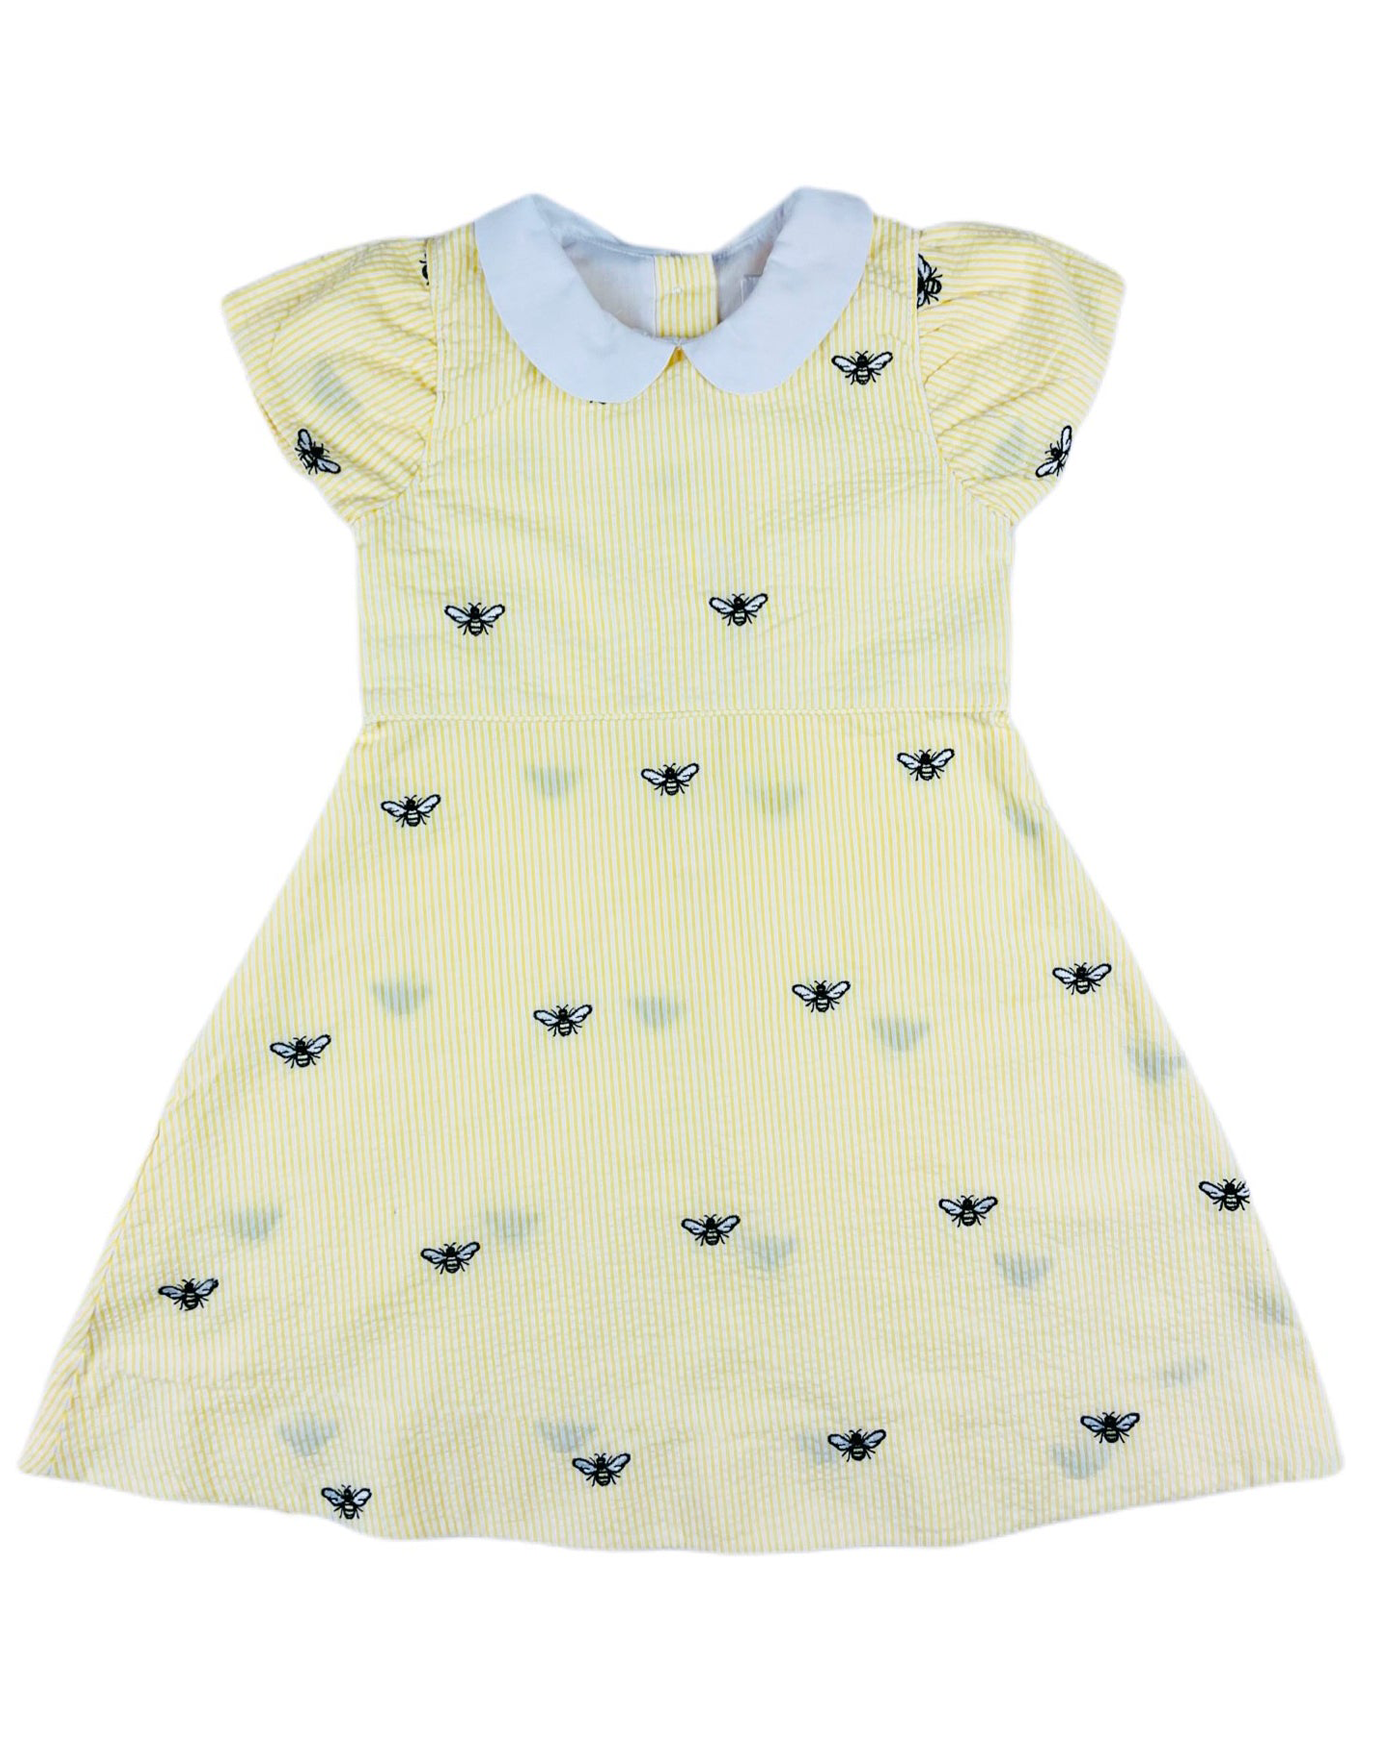 Yellow and White Seersucker Dress with Embroidered Honeybees and Peter Pan Collar